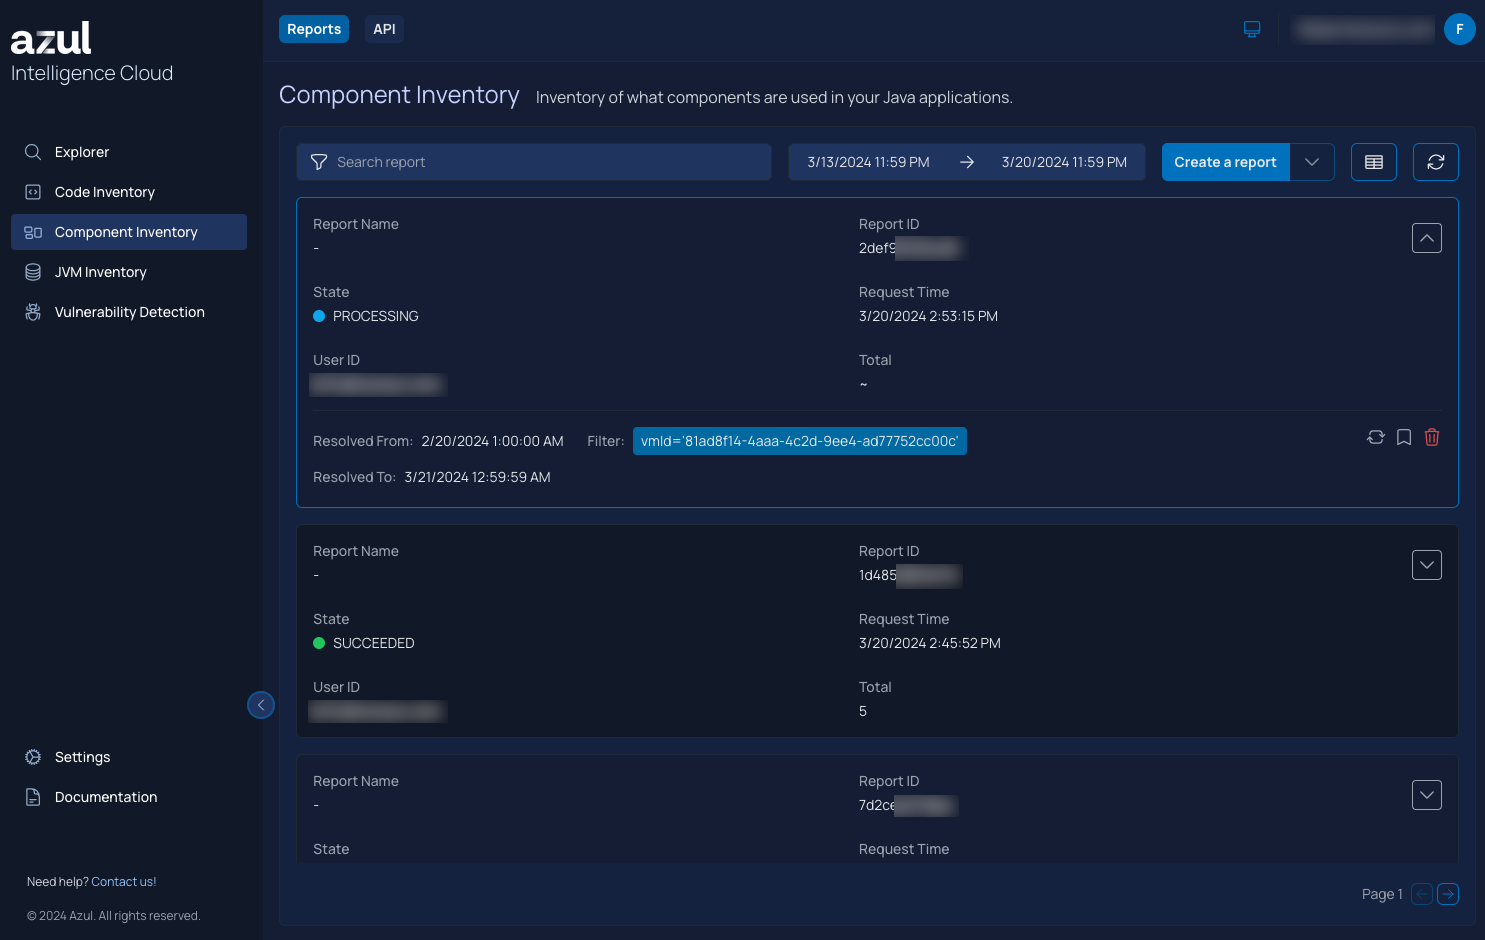 Example of a Component Inventory view in the Azul Intelligence Cloud UI